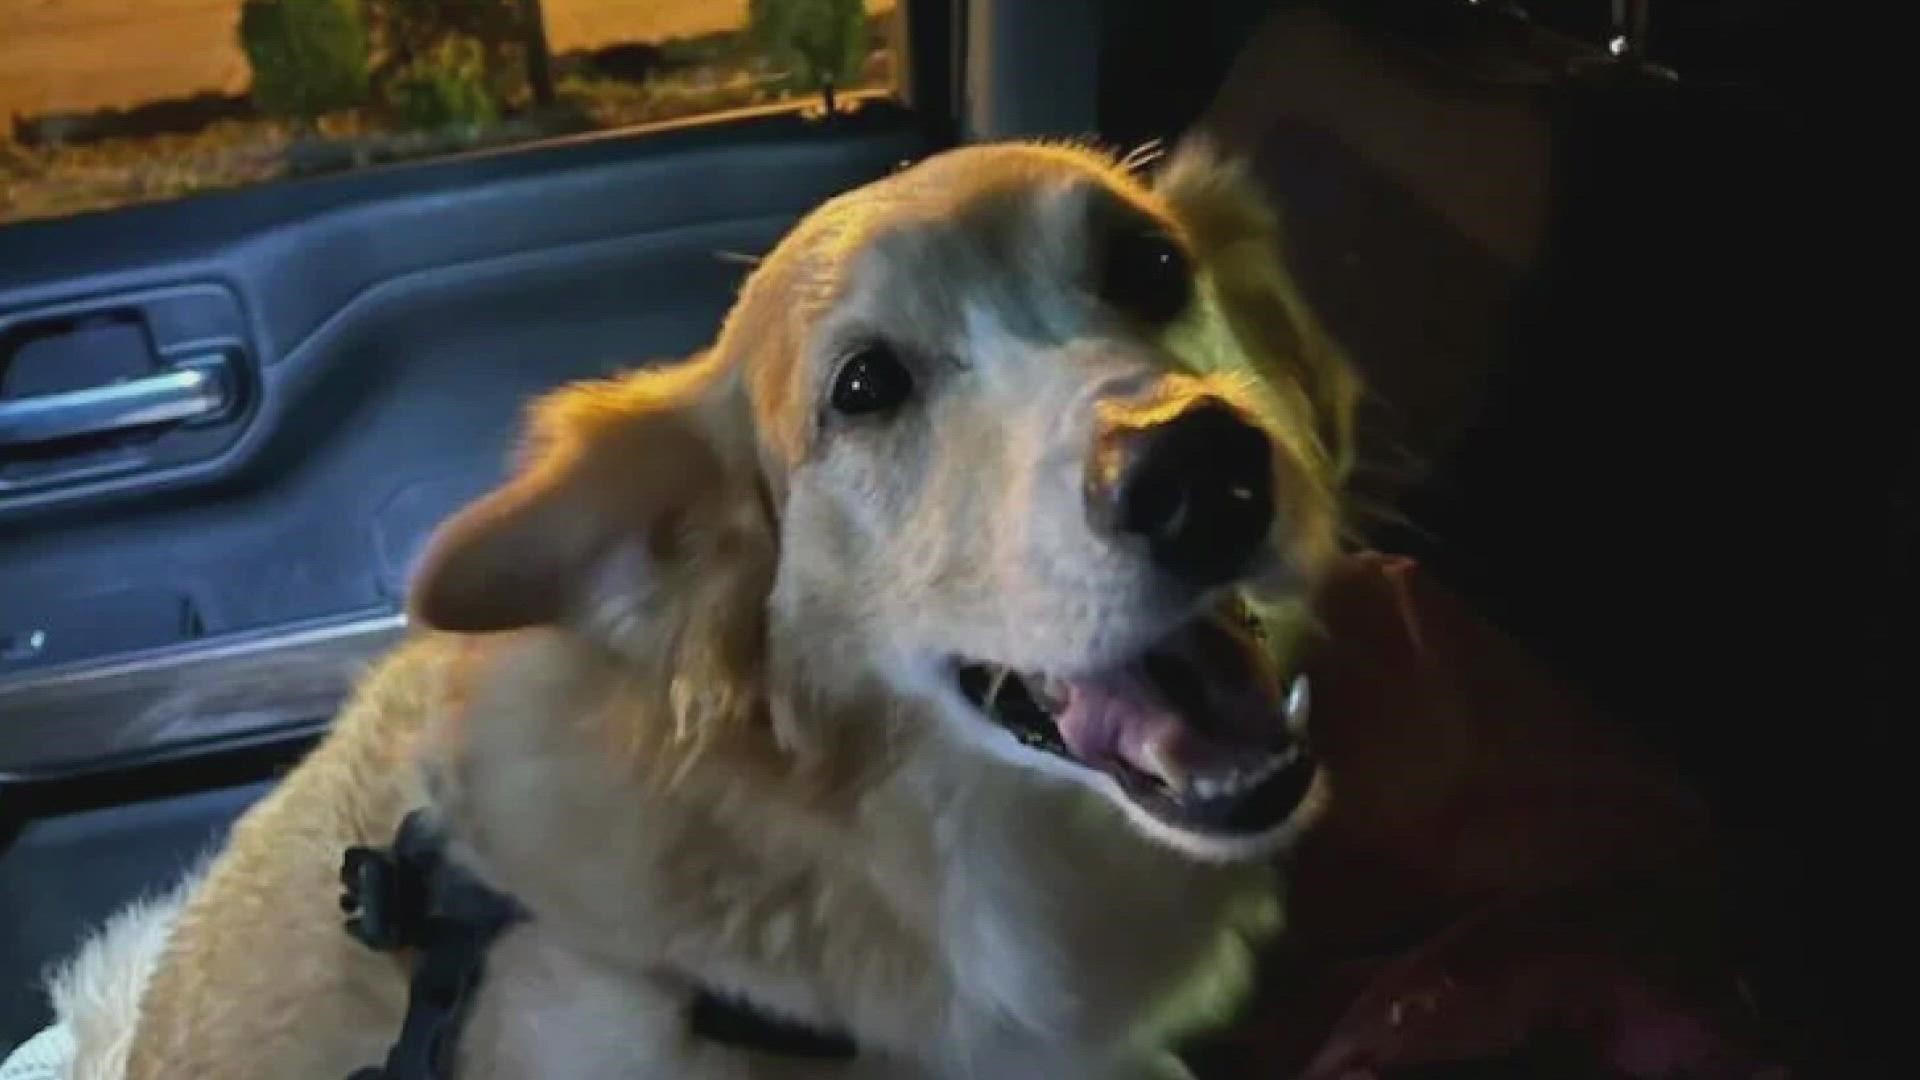 A disabled dog was taken in a stolen truck but has been reunited with his owner after thieves threw him from vehicle.